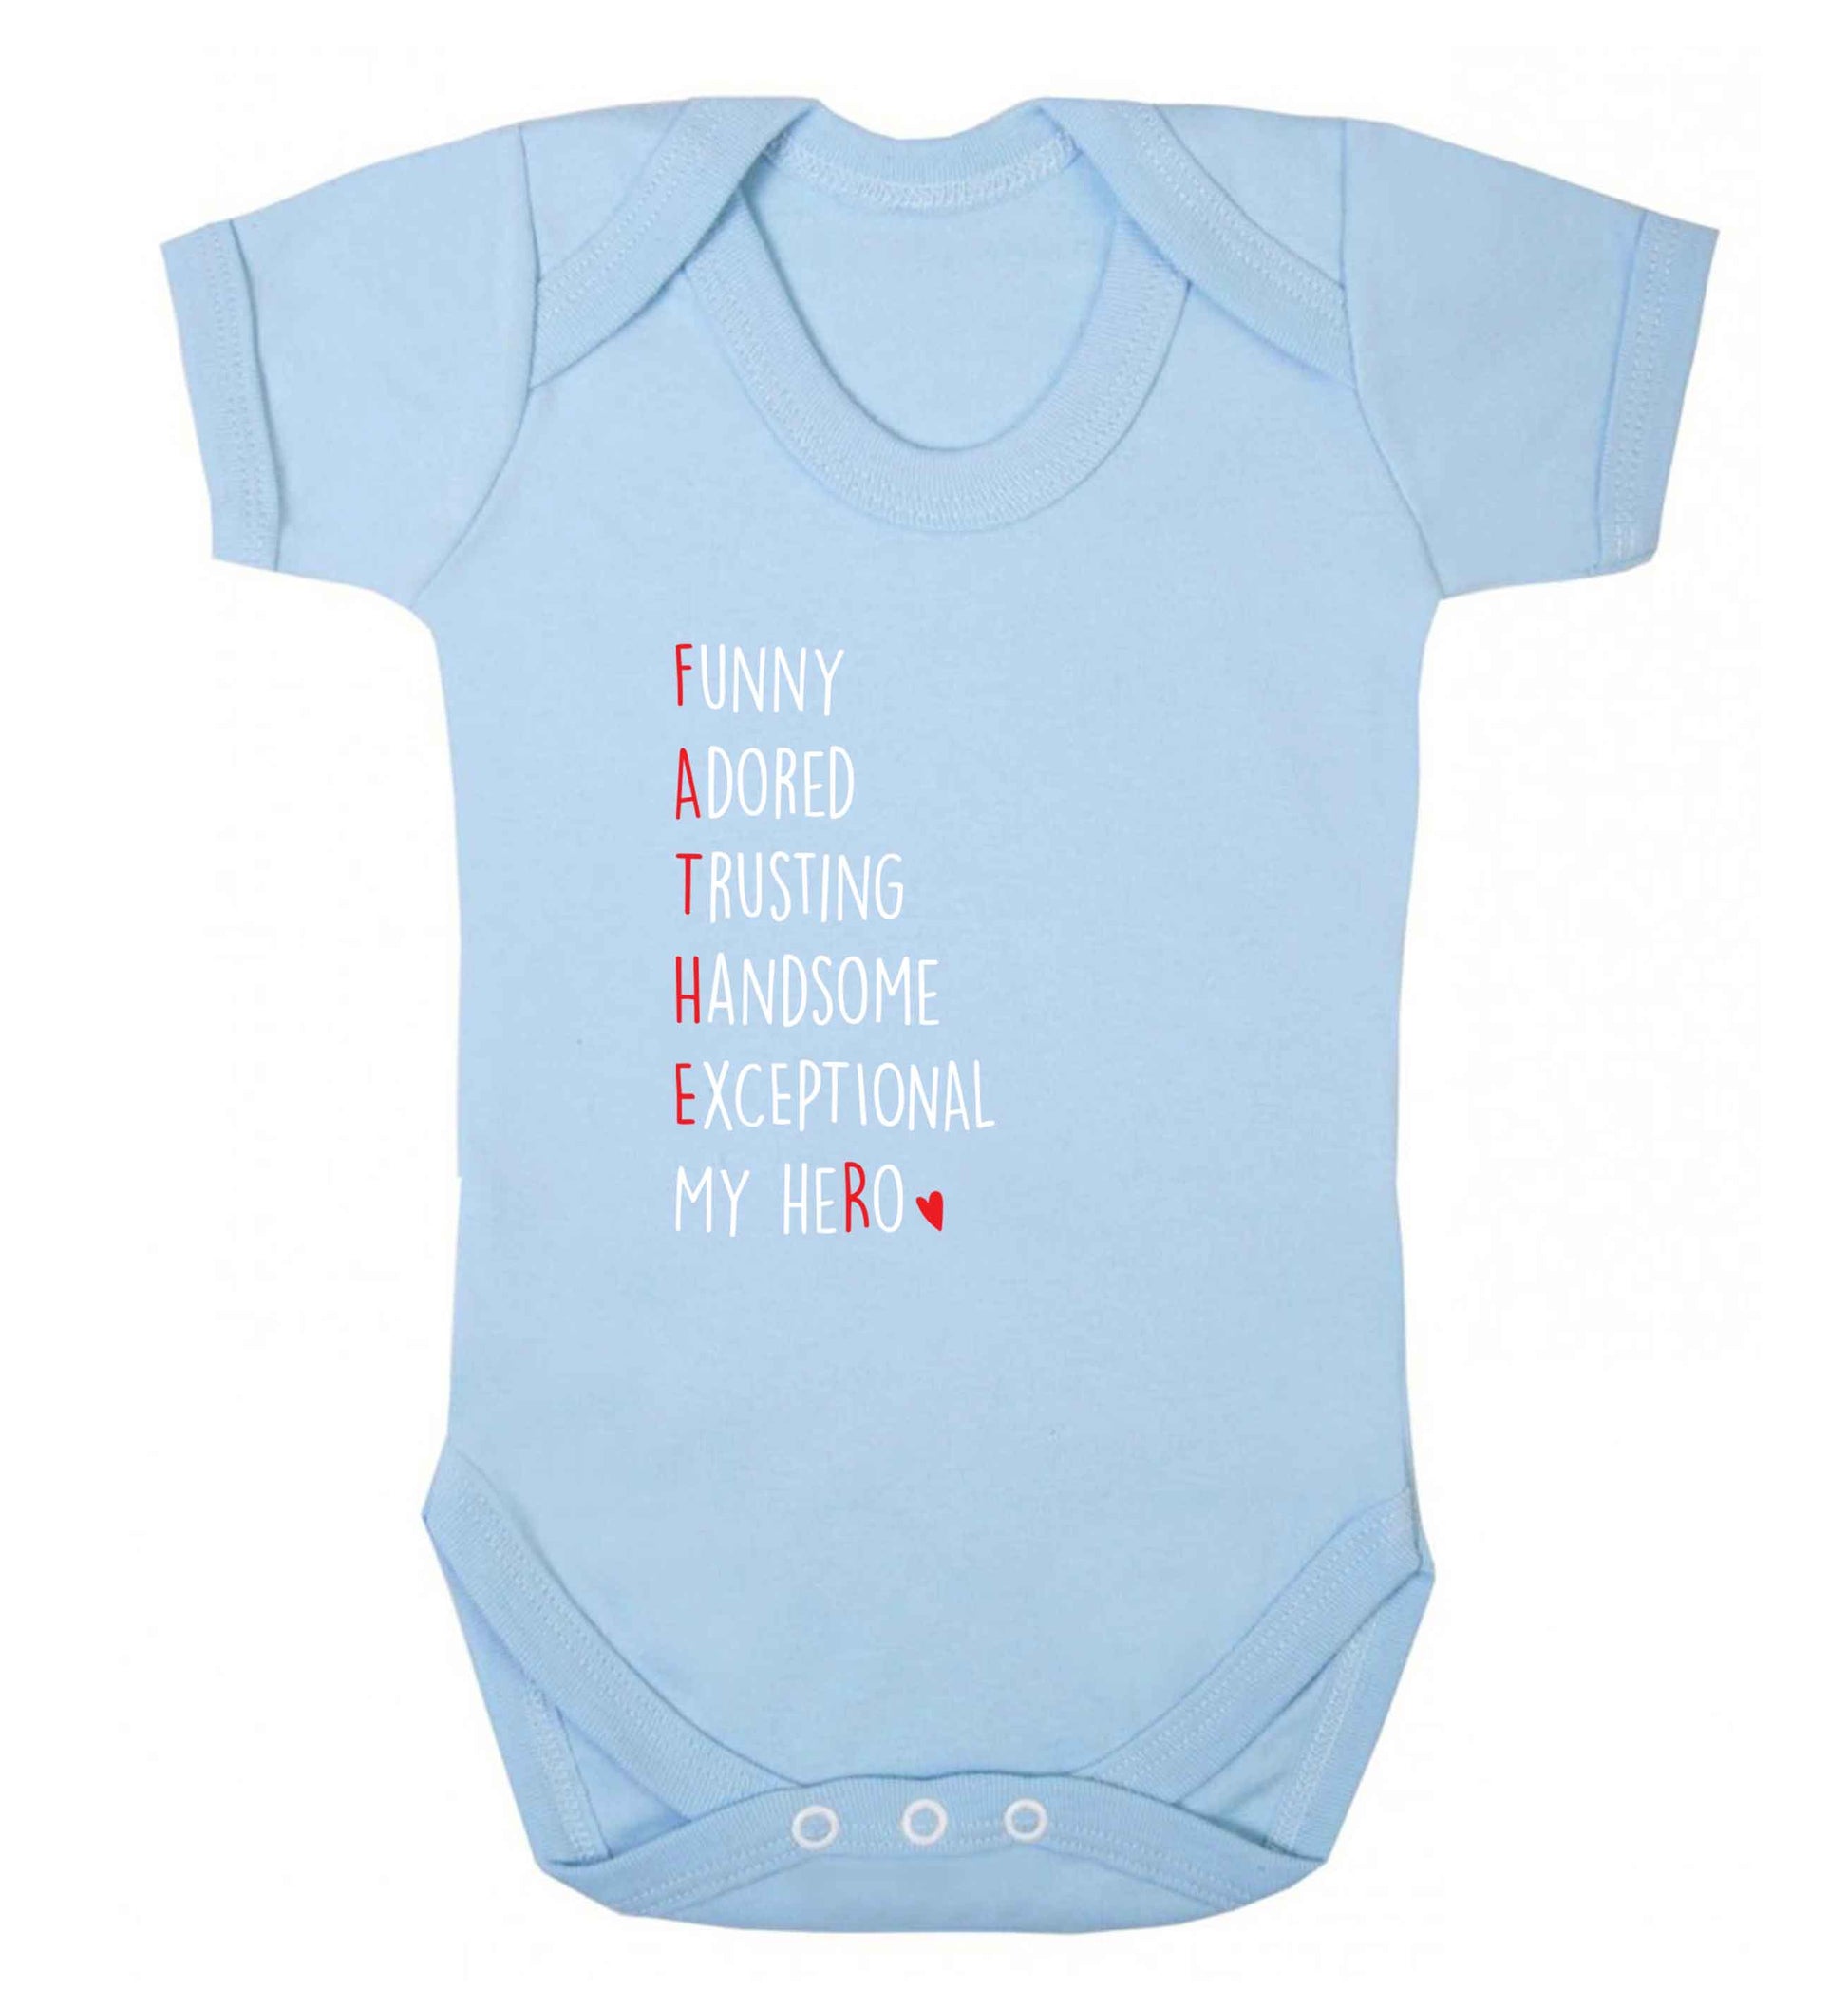 Father, funny adored trusting handsome exceptional my hero baby vest pale blue 18-24 months